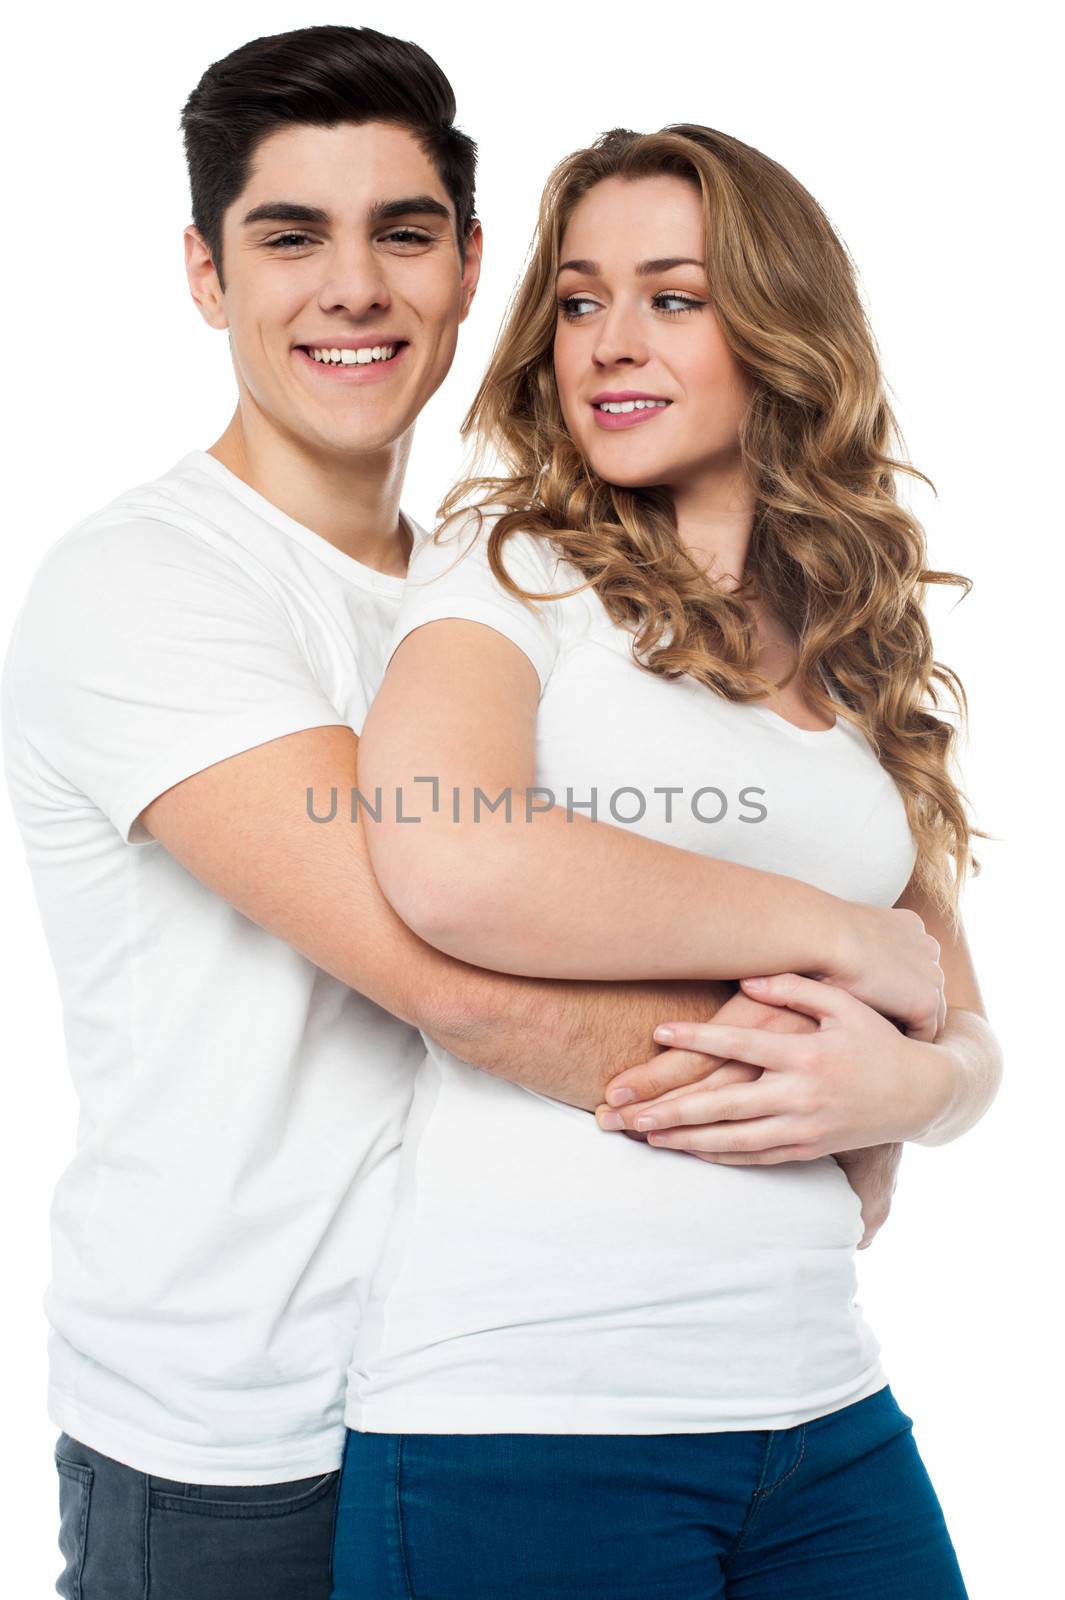 Handsome young man embracing his girlfriend